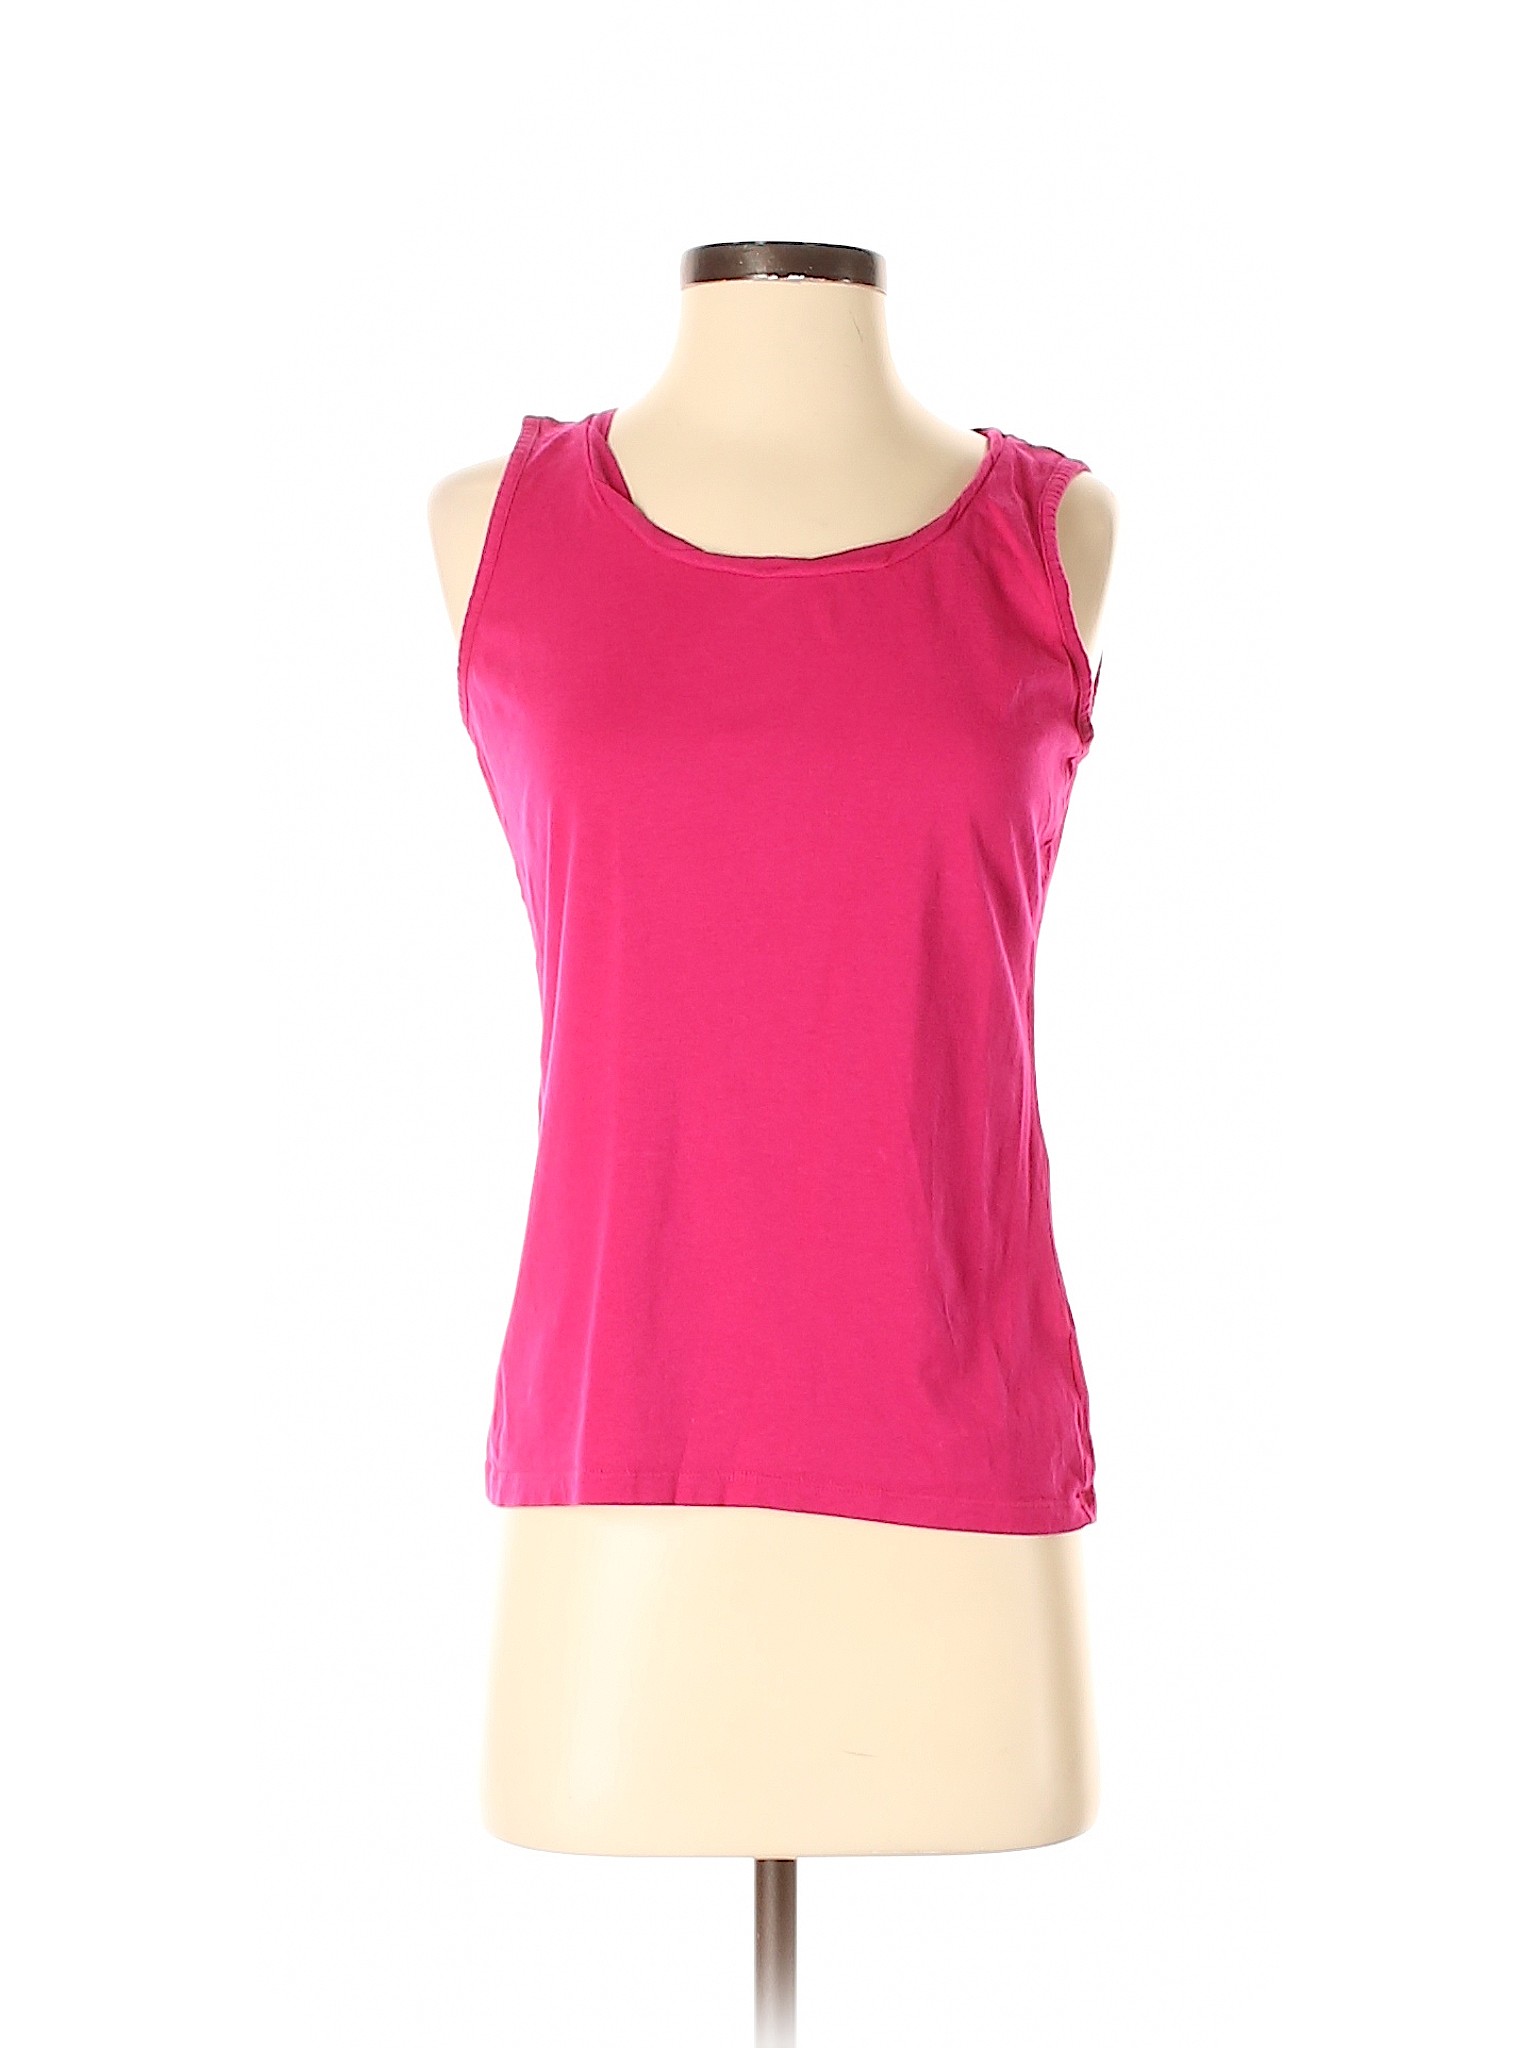 Talbots Outlet Solid Pink Tank Top Size S - 88% off | thredUP